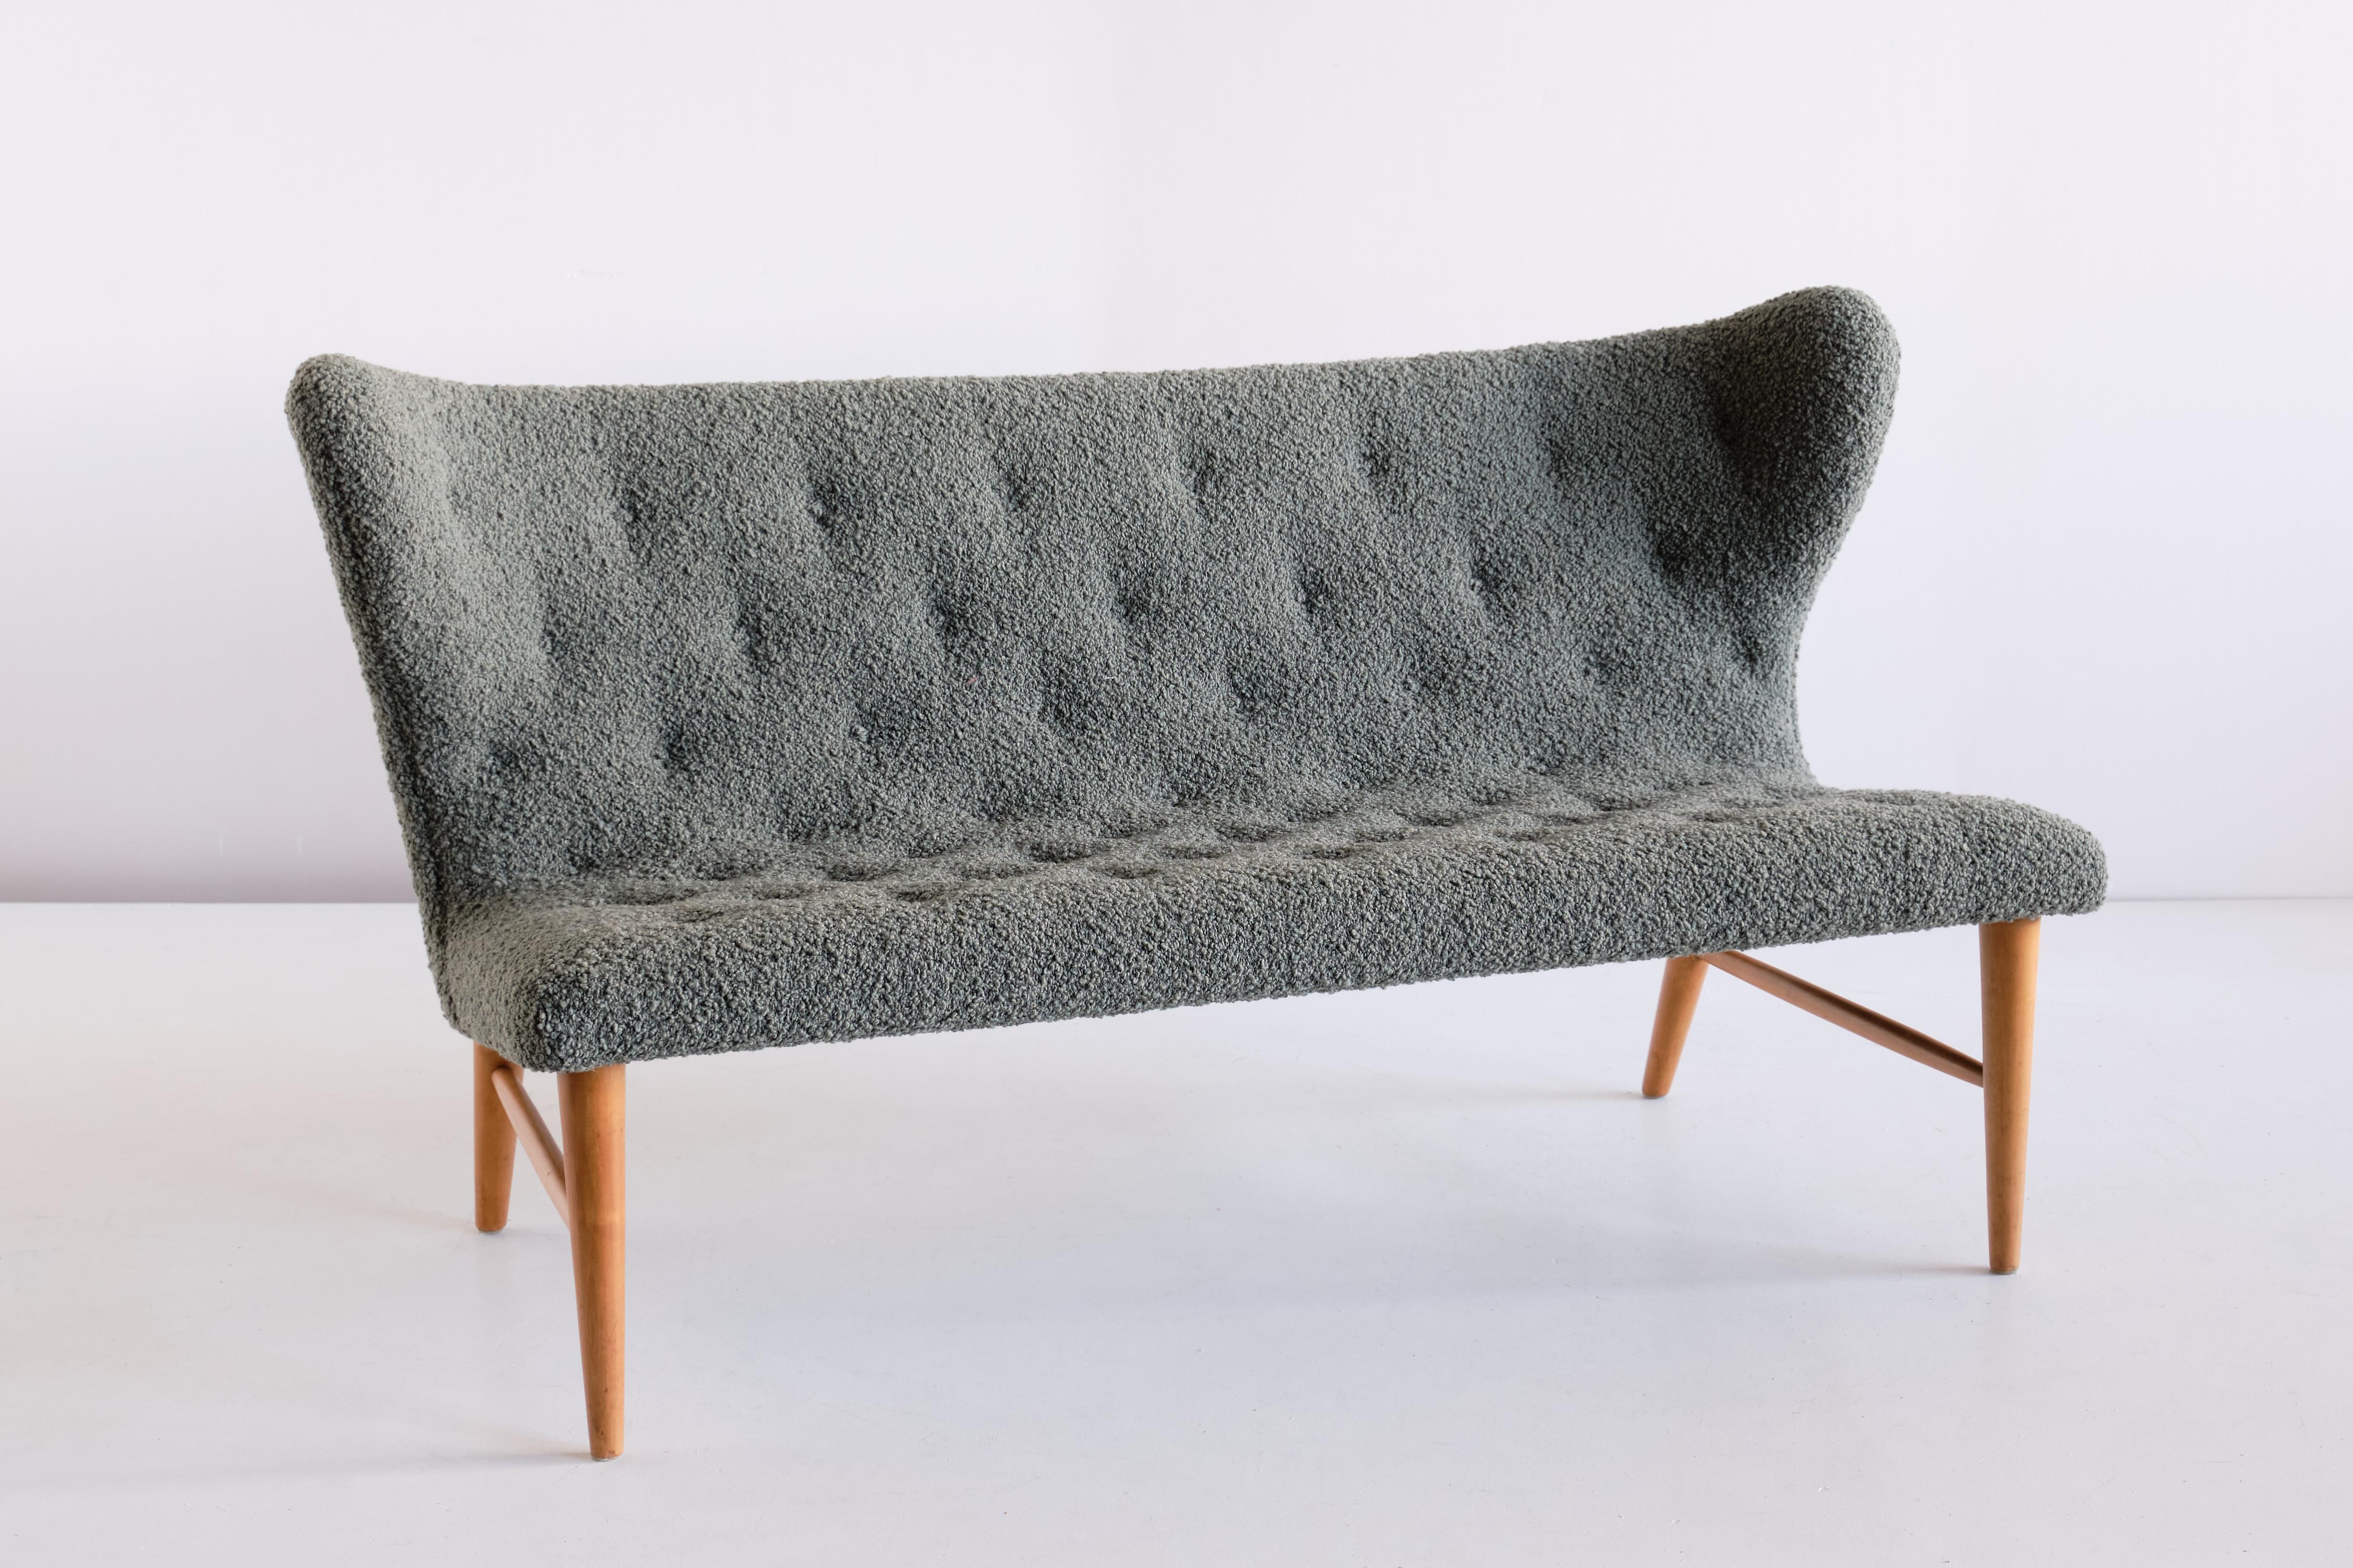 This rare sofa was designed by Eric Bertil Karlén and produced by his company Firma Rumsinteriör in Sweden in the 1940s. The elegant shape of the design is emphasized by the buttoned wing shaped back and seat. The solid beech frame consists of